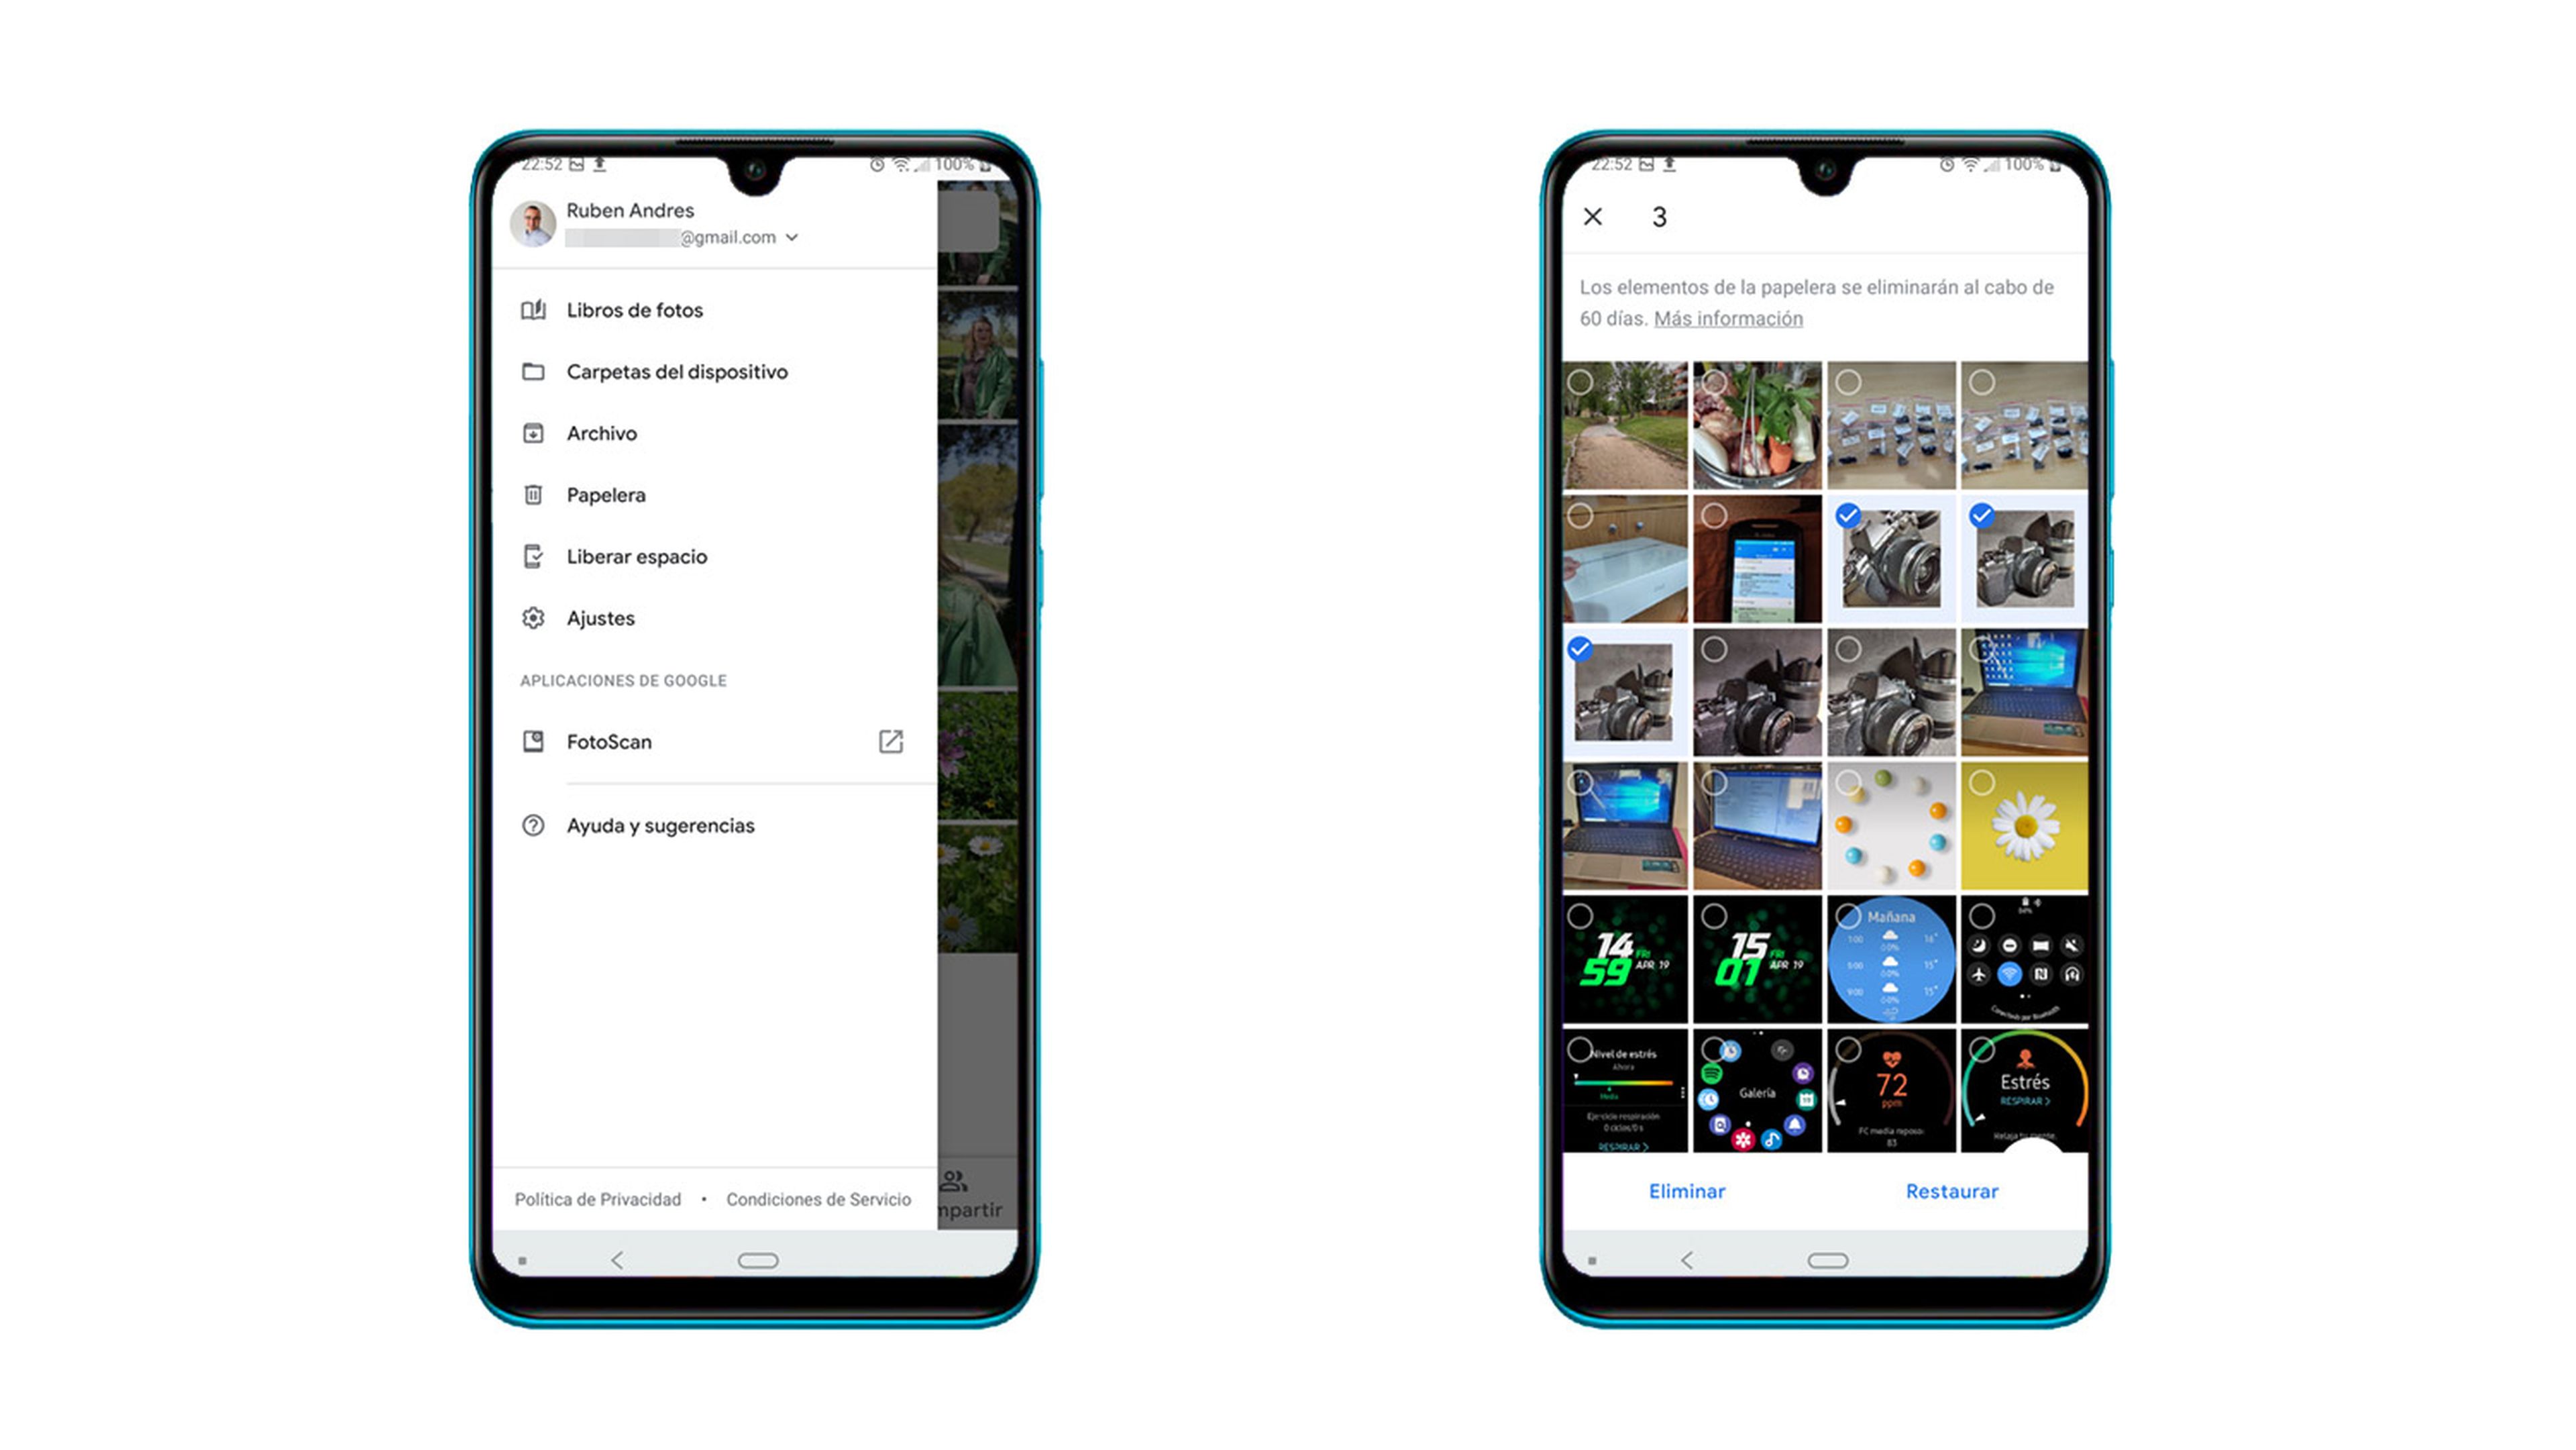 How to recover deleted photos on Android in 2019